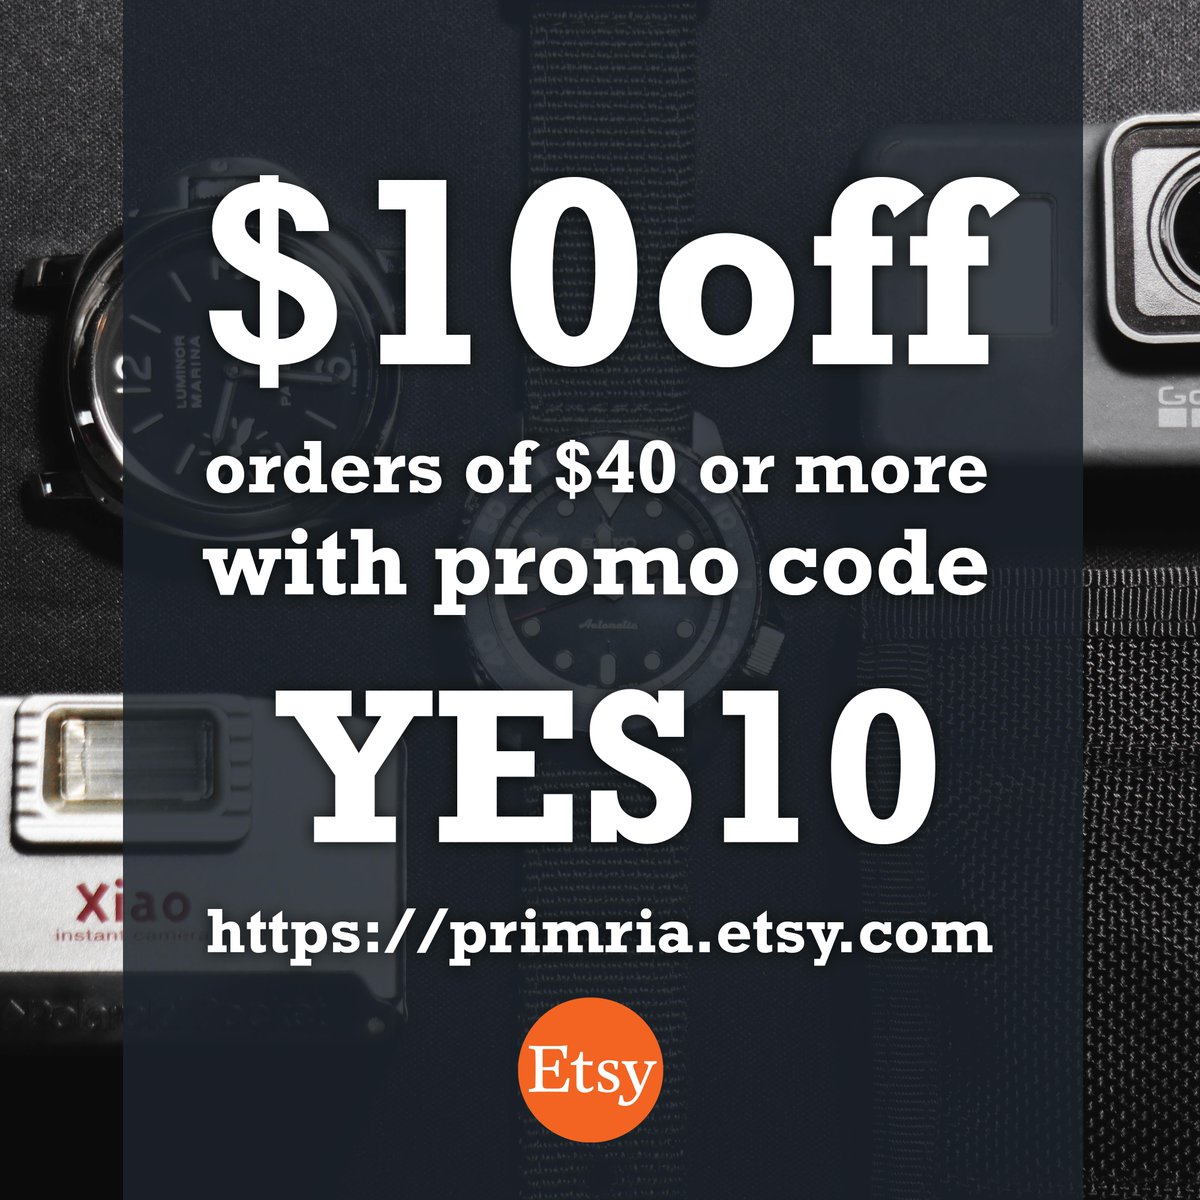 📷 This week we’re giving shoppers $10 off orders of $40 or more with promo code YES10! 📷The promotion is officially live and ends Wednesday October 11 at 11:59pm ET. primria.etsy.com
#watchstrap
#watchband
#watchbands
#leatherwatchstrap
#nylonwatchstrap
#watchmod